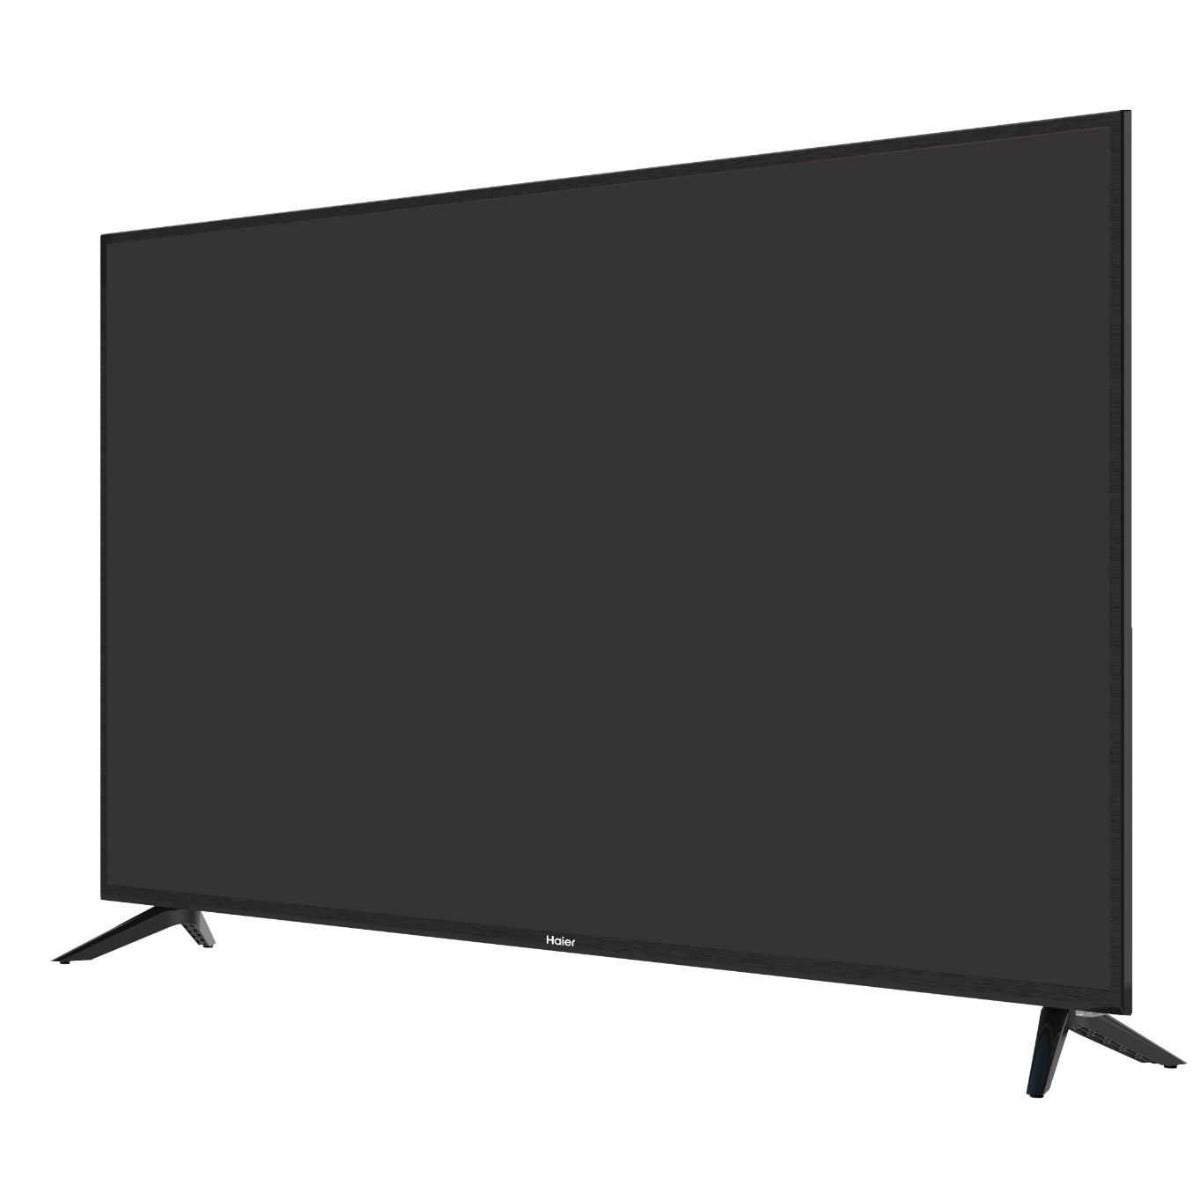 Haier 32 Inch HD LED TV with Built-in Receiver - H32D6M